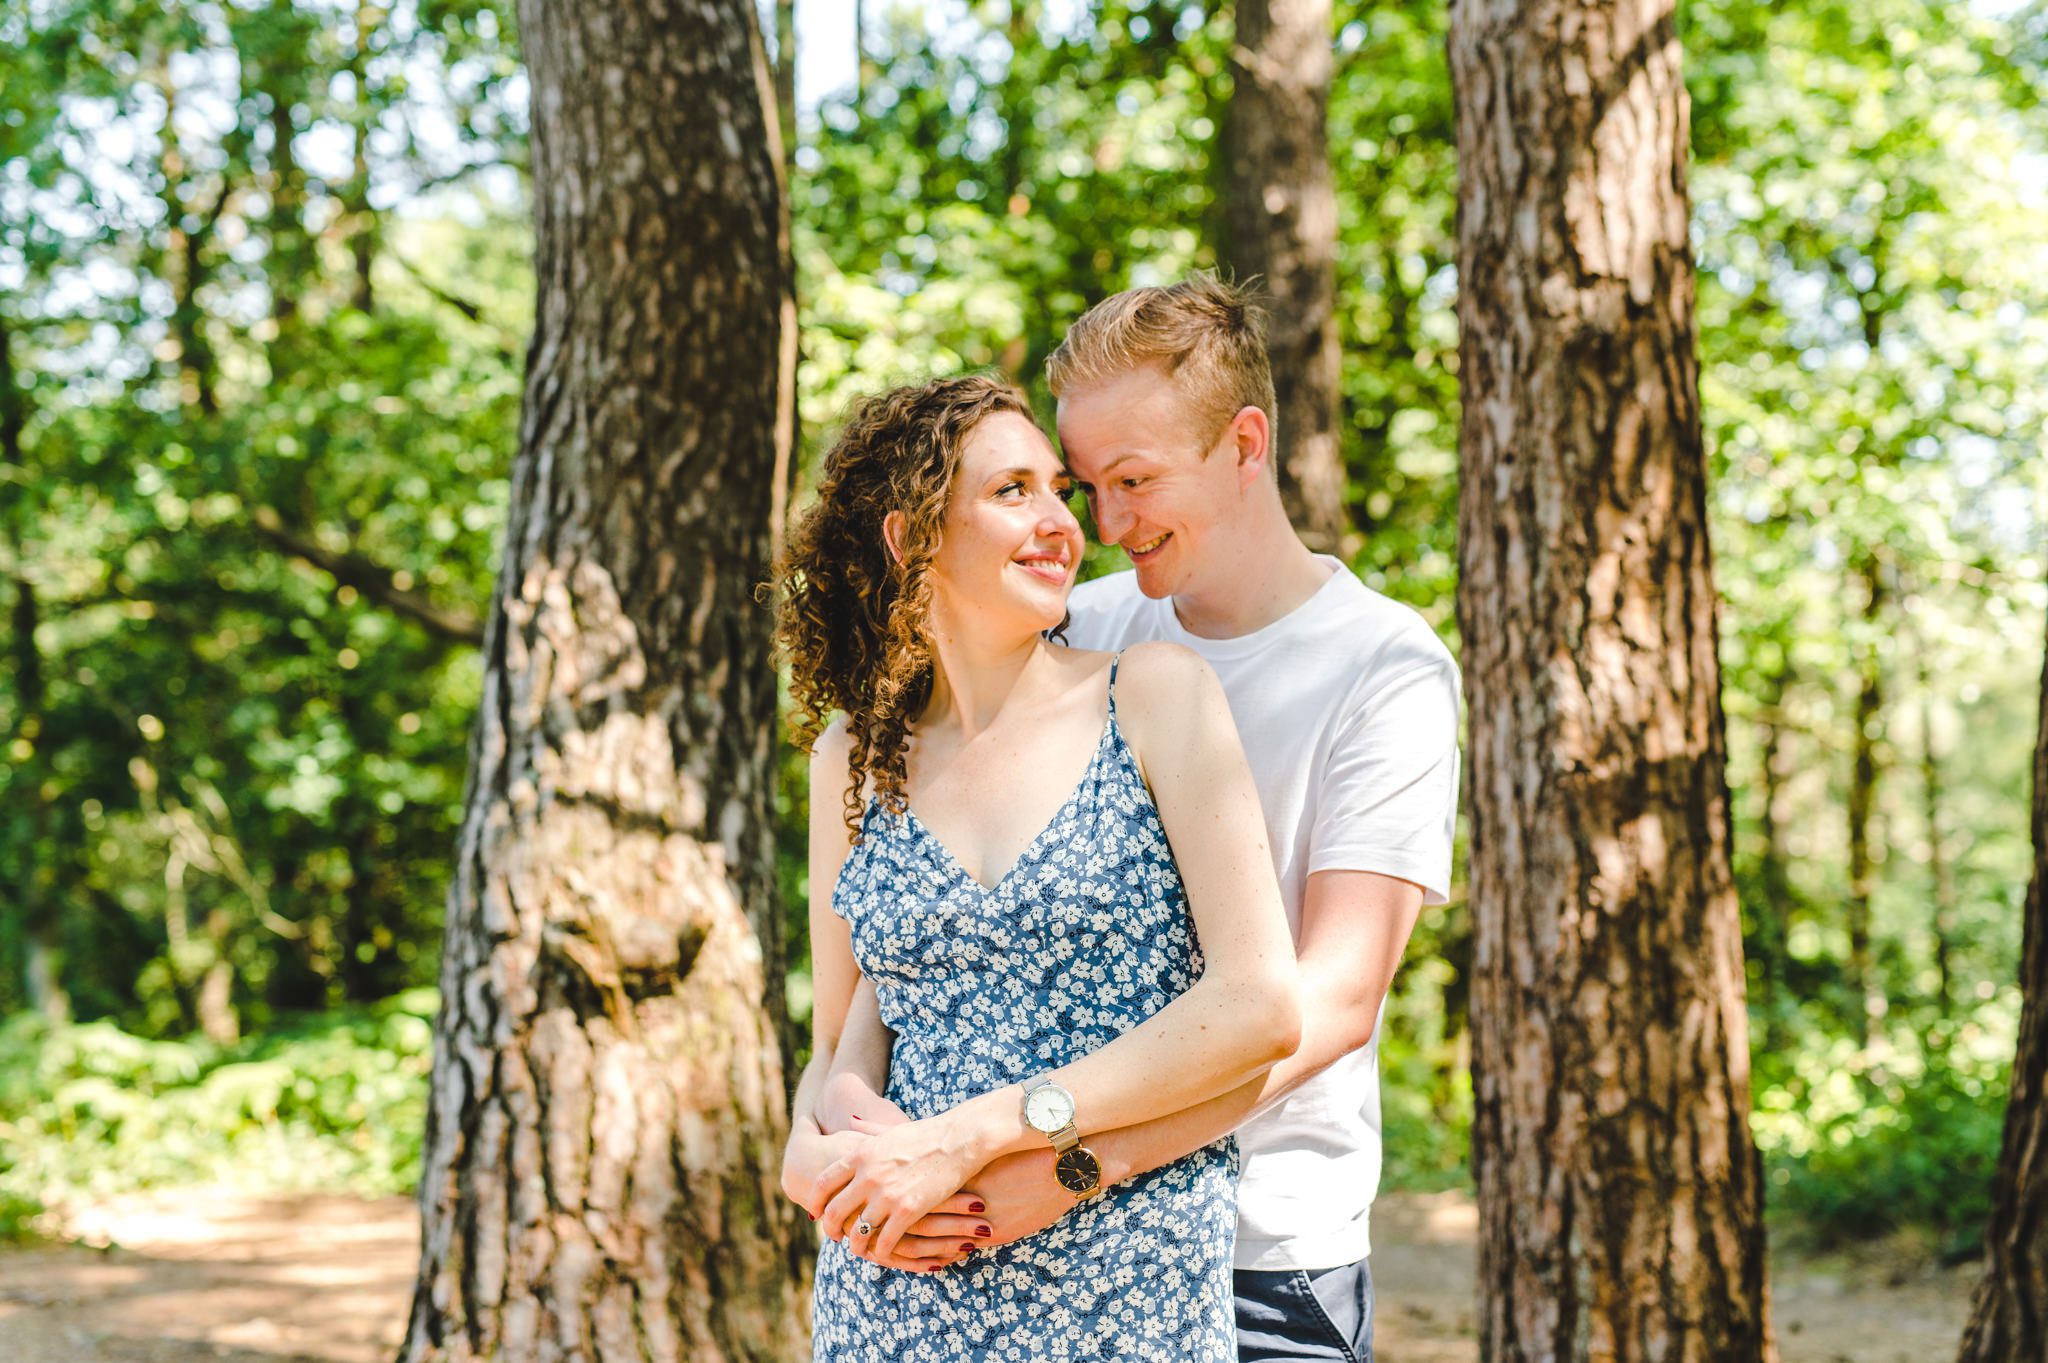 A man and woman smiling on their surrey engagement shoot